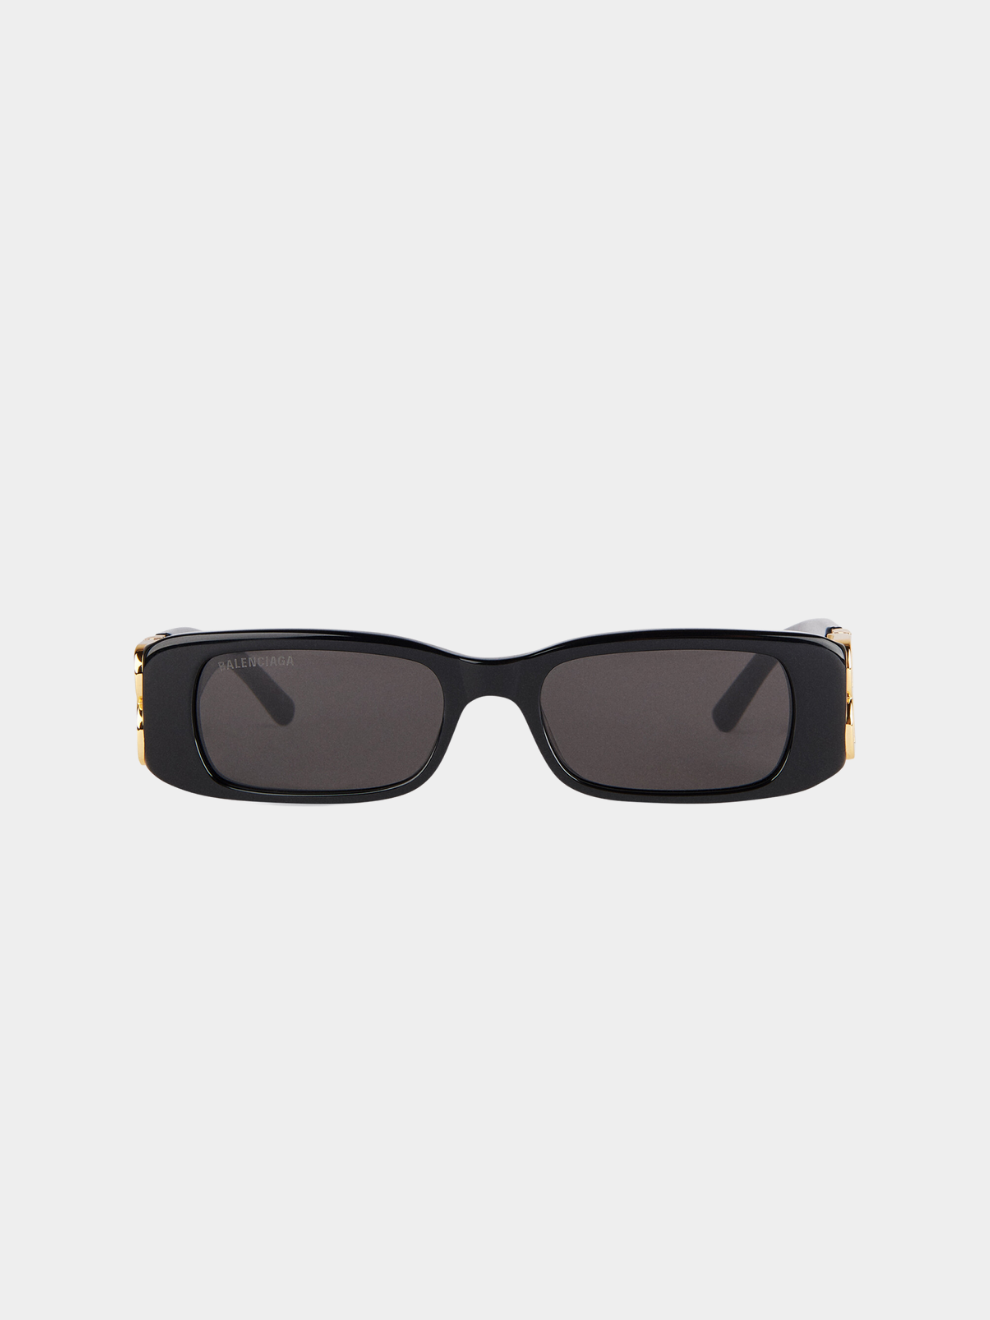 Dynasty Rectangle Sunglasses in Black